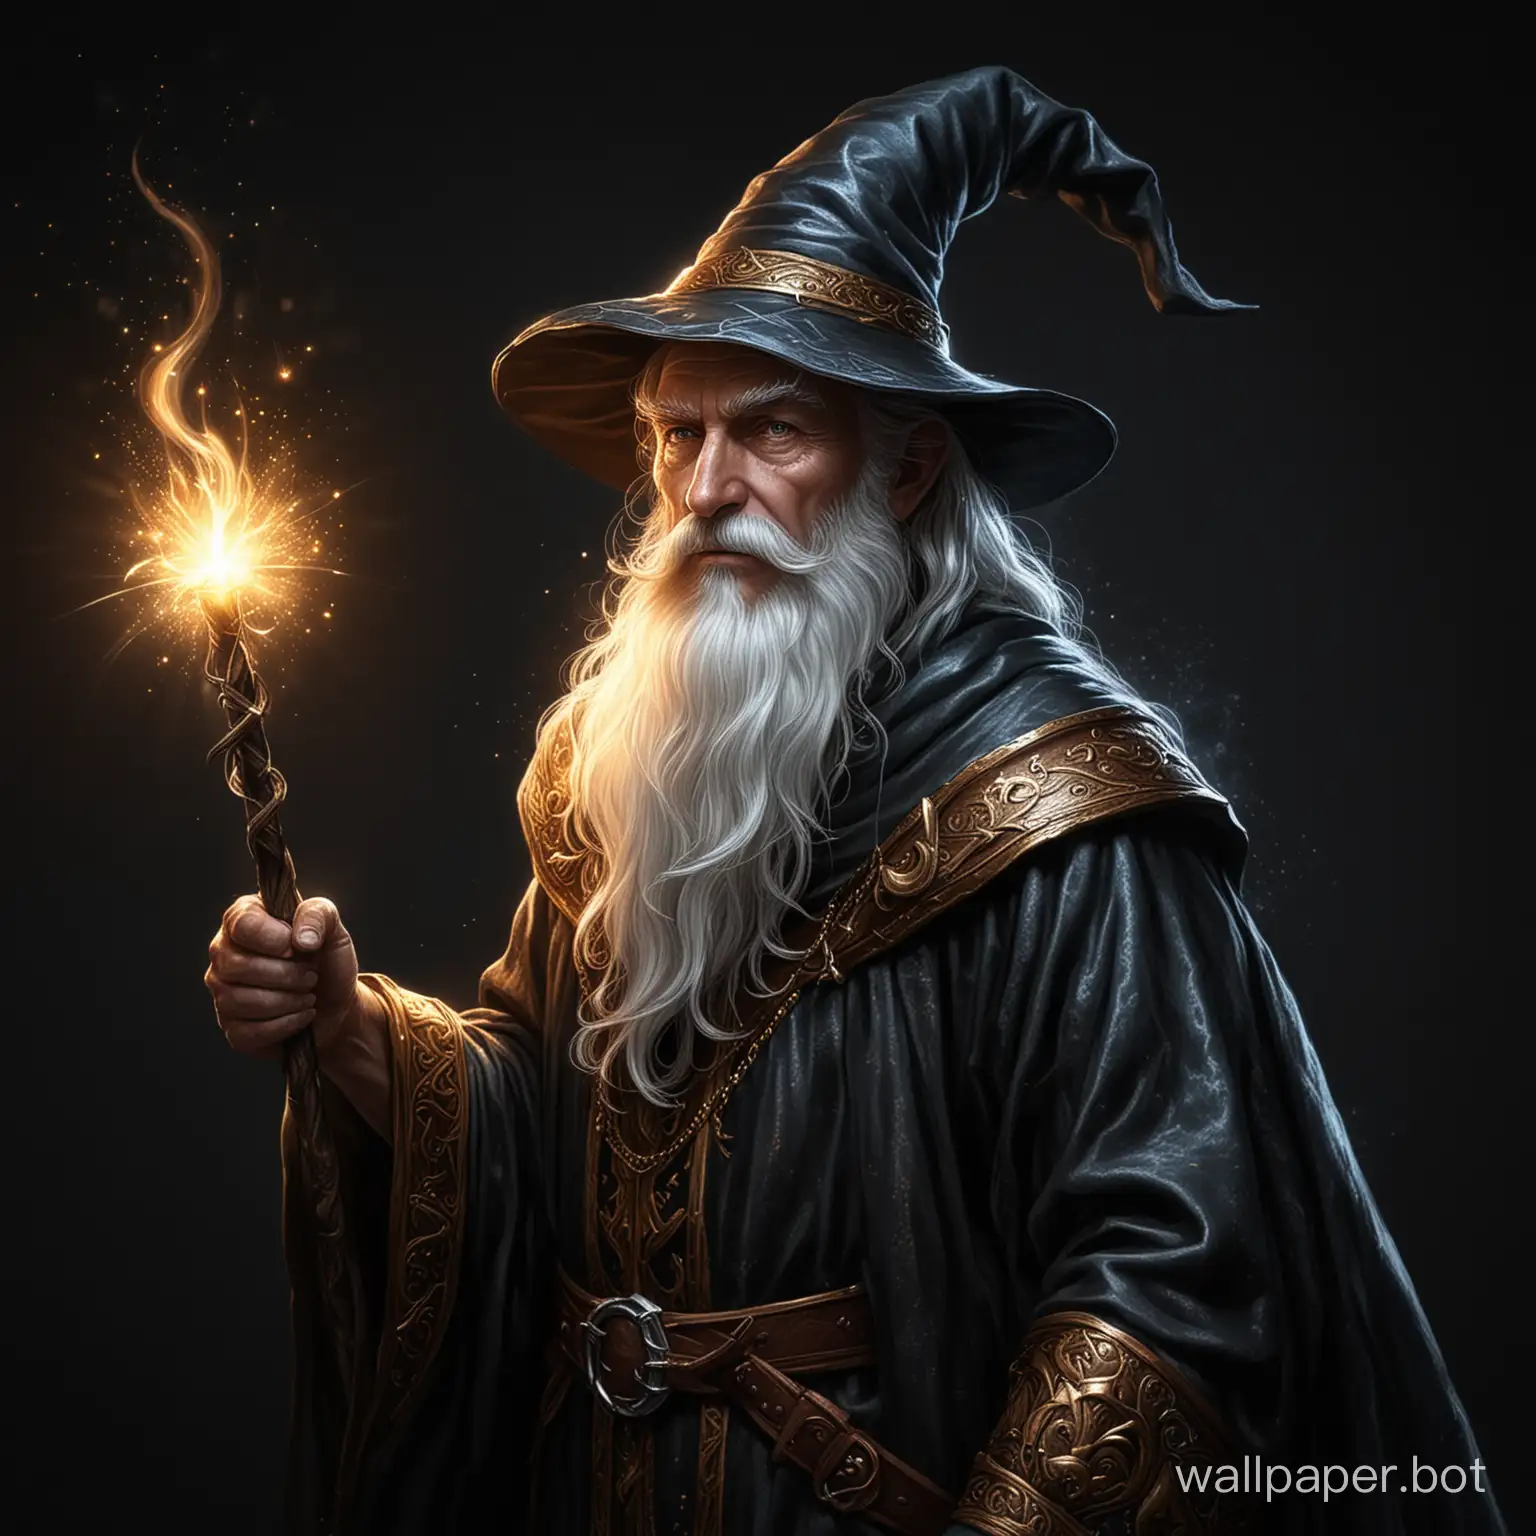 Draw a fantasy wizard who shines brightly on a black background